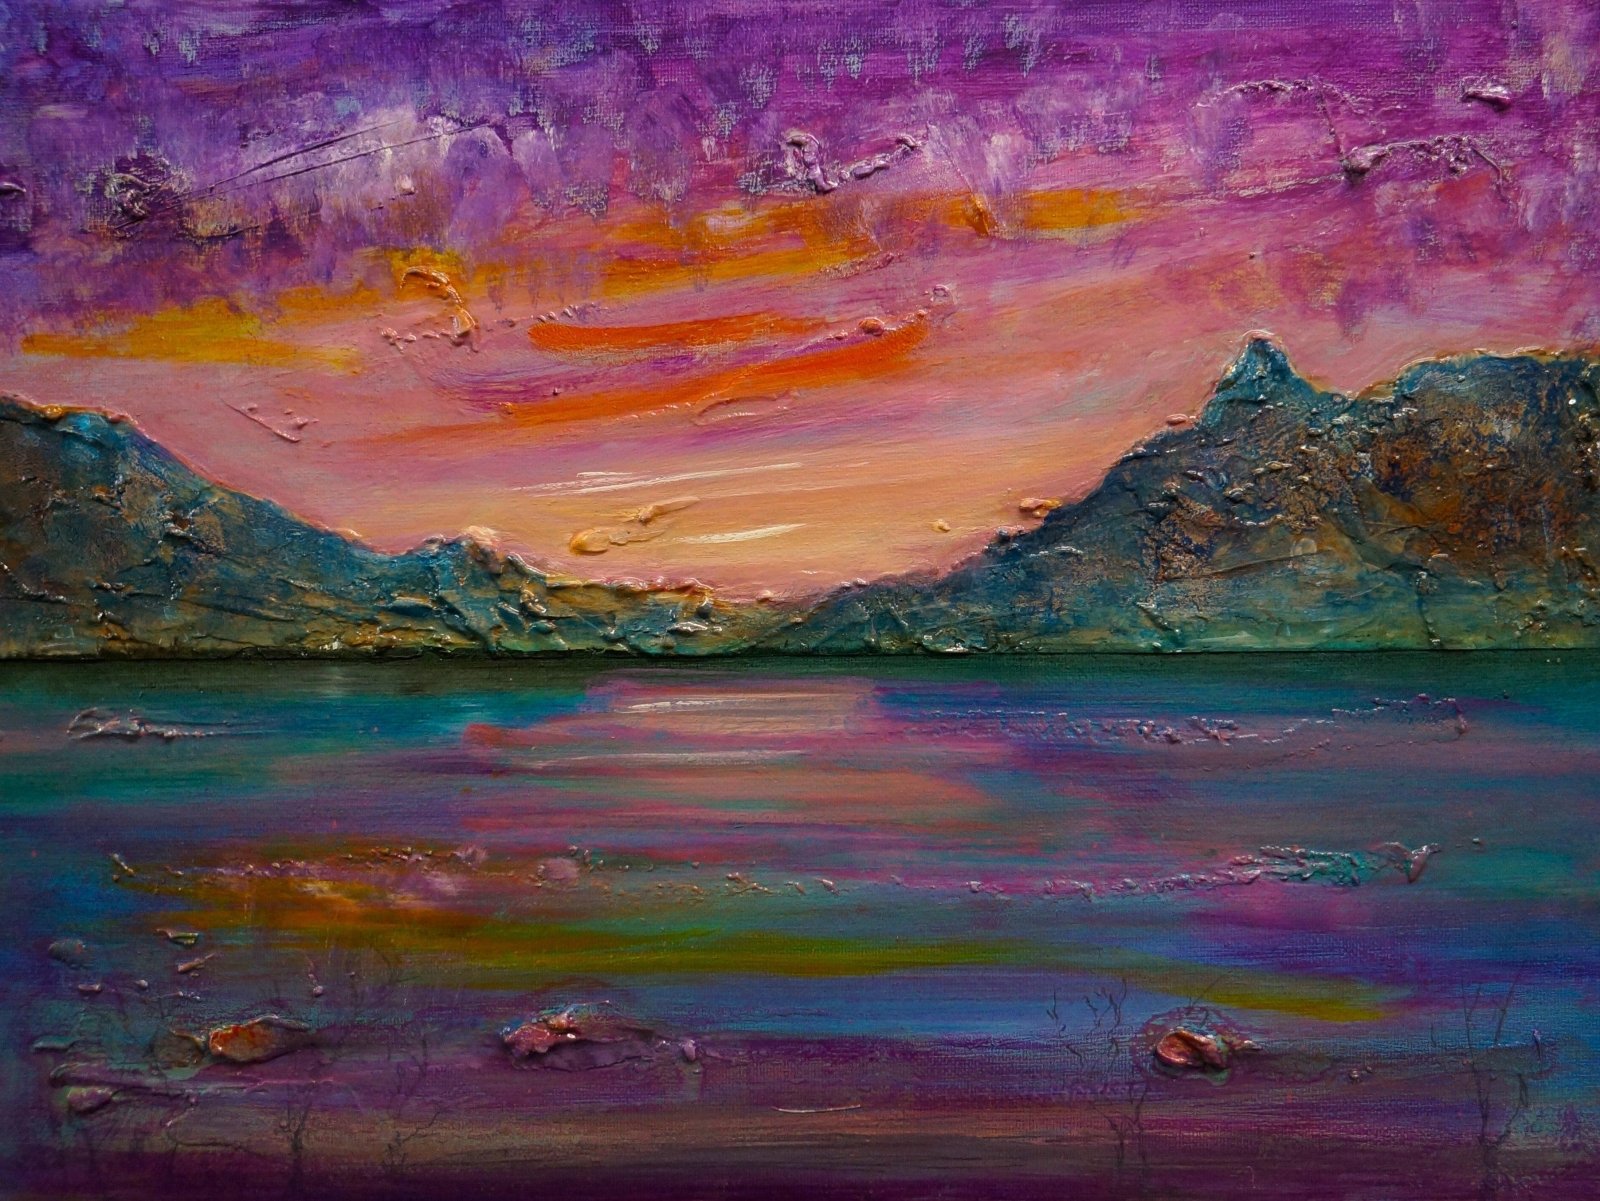 Loch Leven Sunset-Signed Art Prints By Scottish Artist Hunter-Scottish Lochs & Mountains Art Gallery-Paintings, Prints, Homeware, Art Gifts From Scotland By Scottish Artist Kevin Hunter